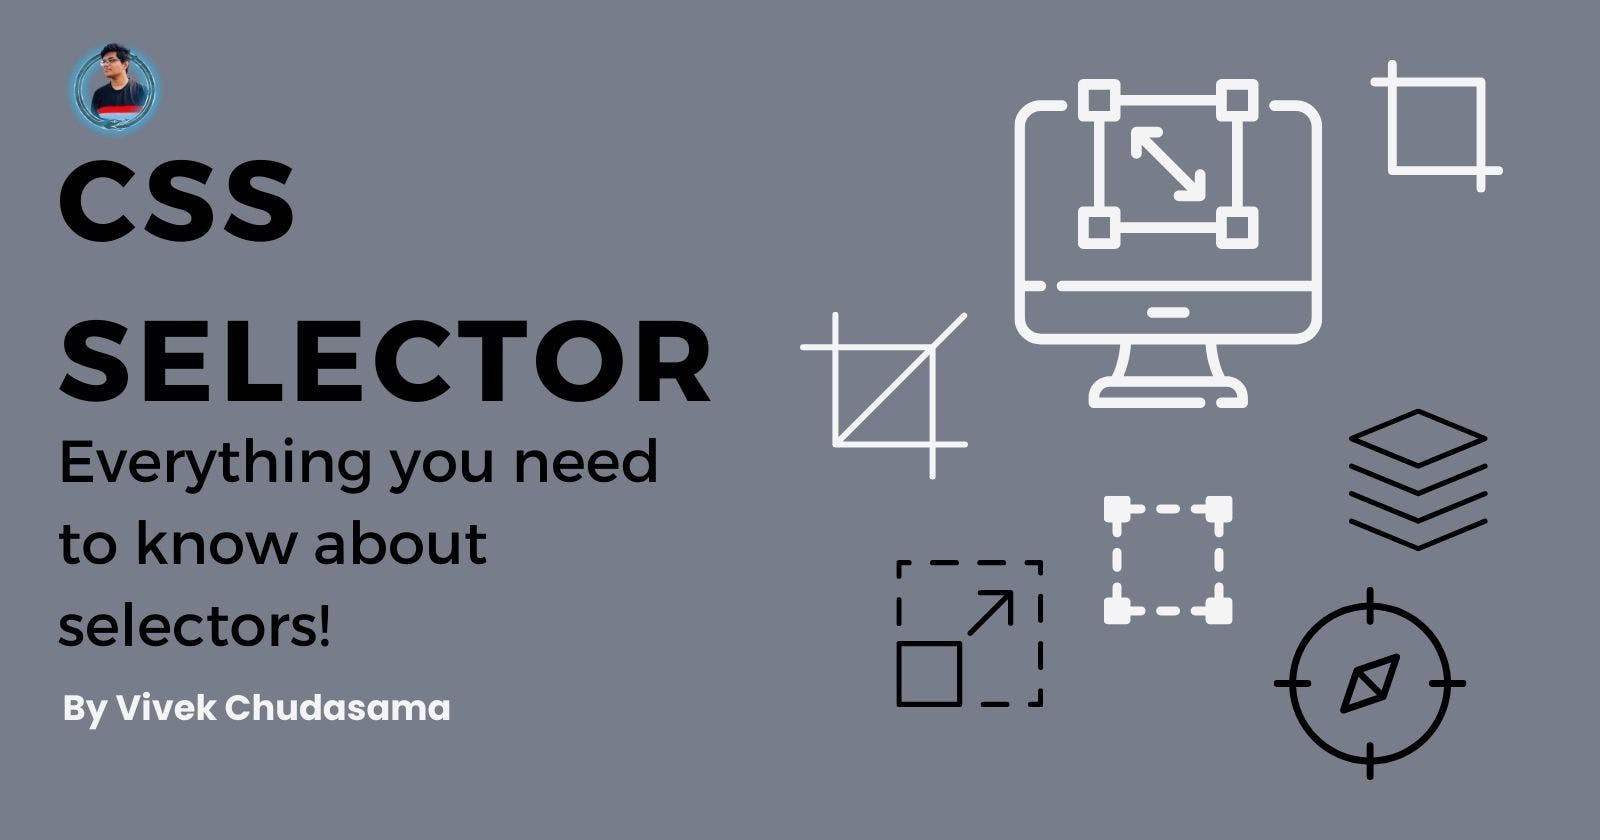 CSS Selector | Everything you need to know!